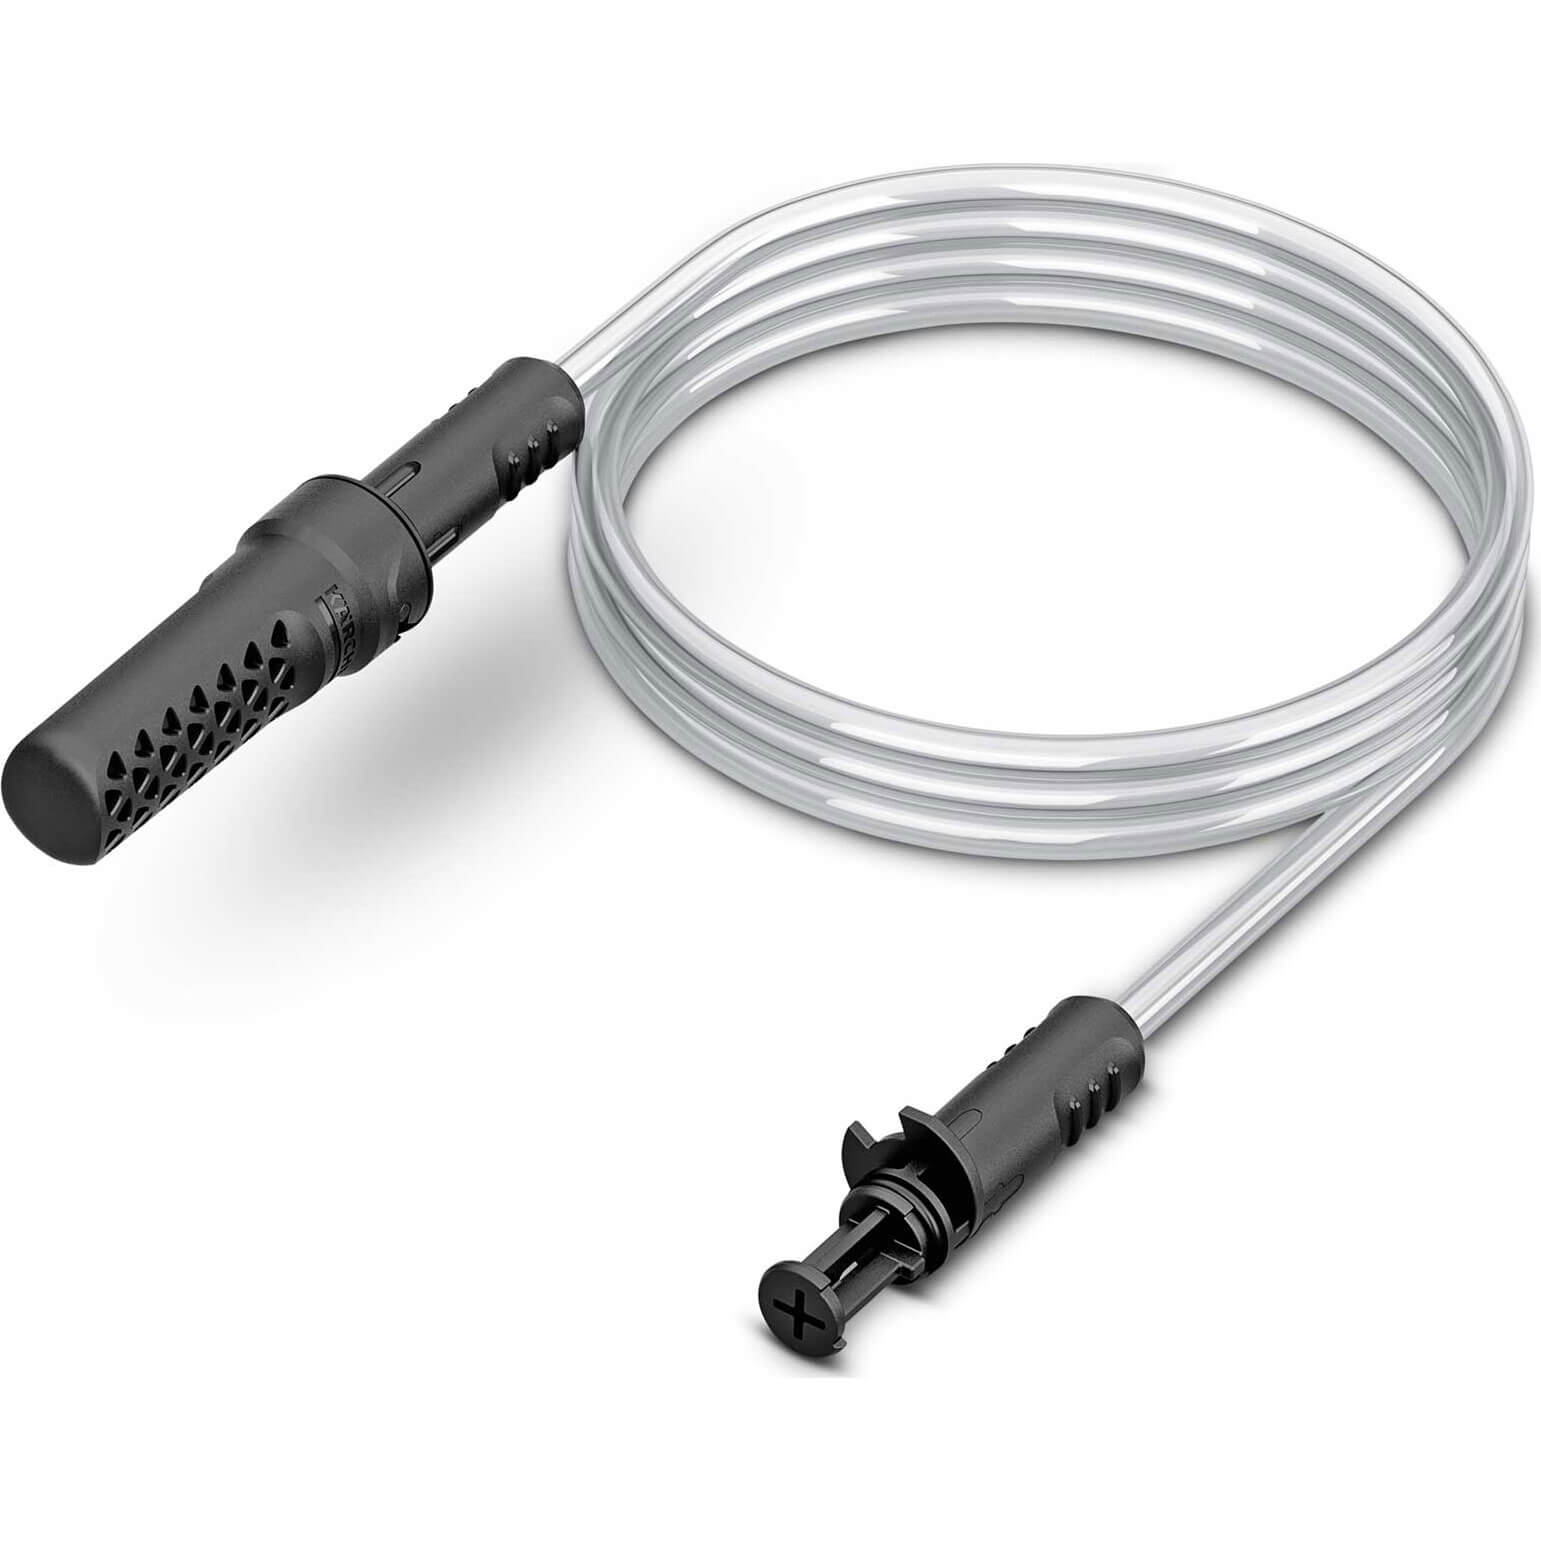 Image of Karcher Water Suction Hose for OC 3 Portable Cleaners